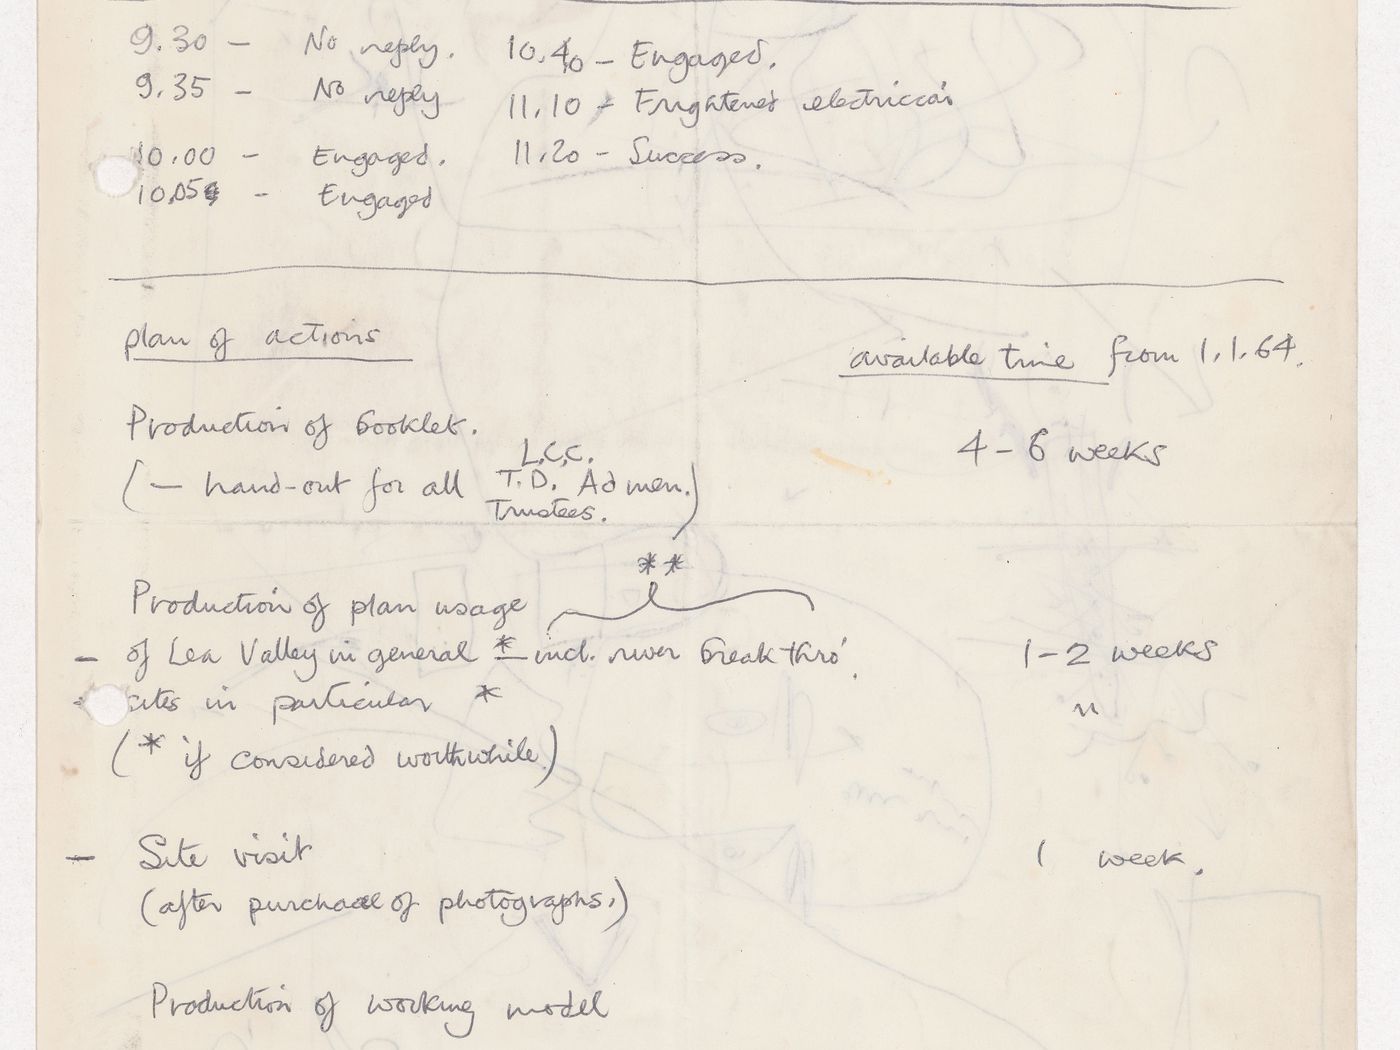 Handwritten notes about a film, most likely about the Fun Palace Project